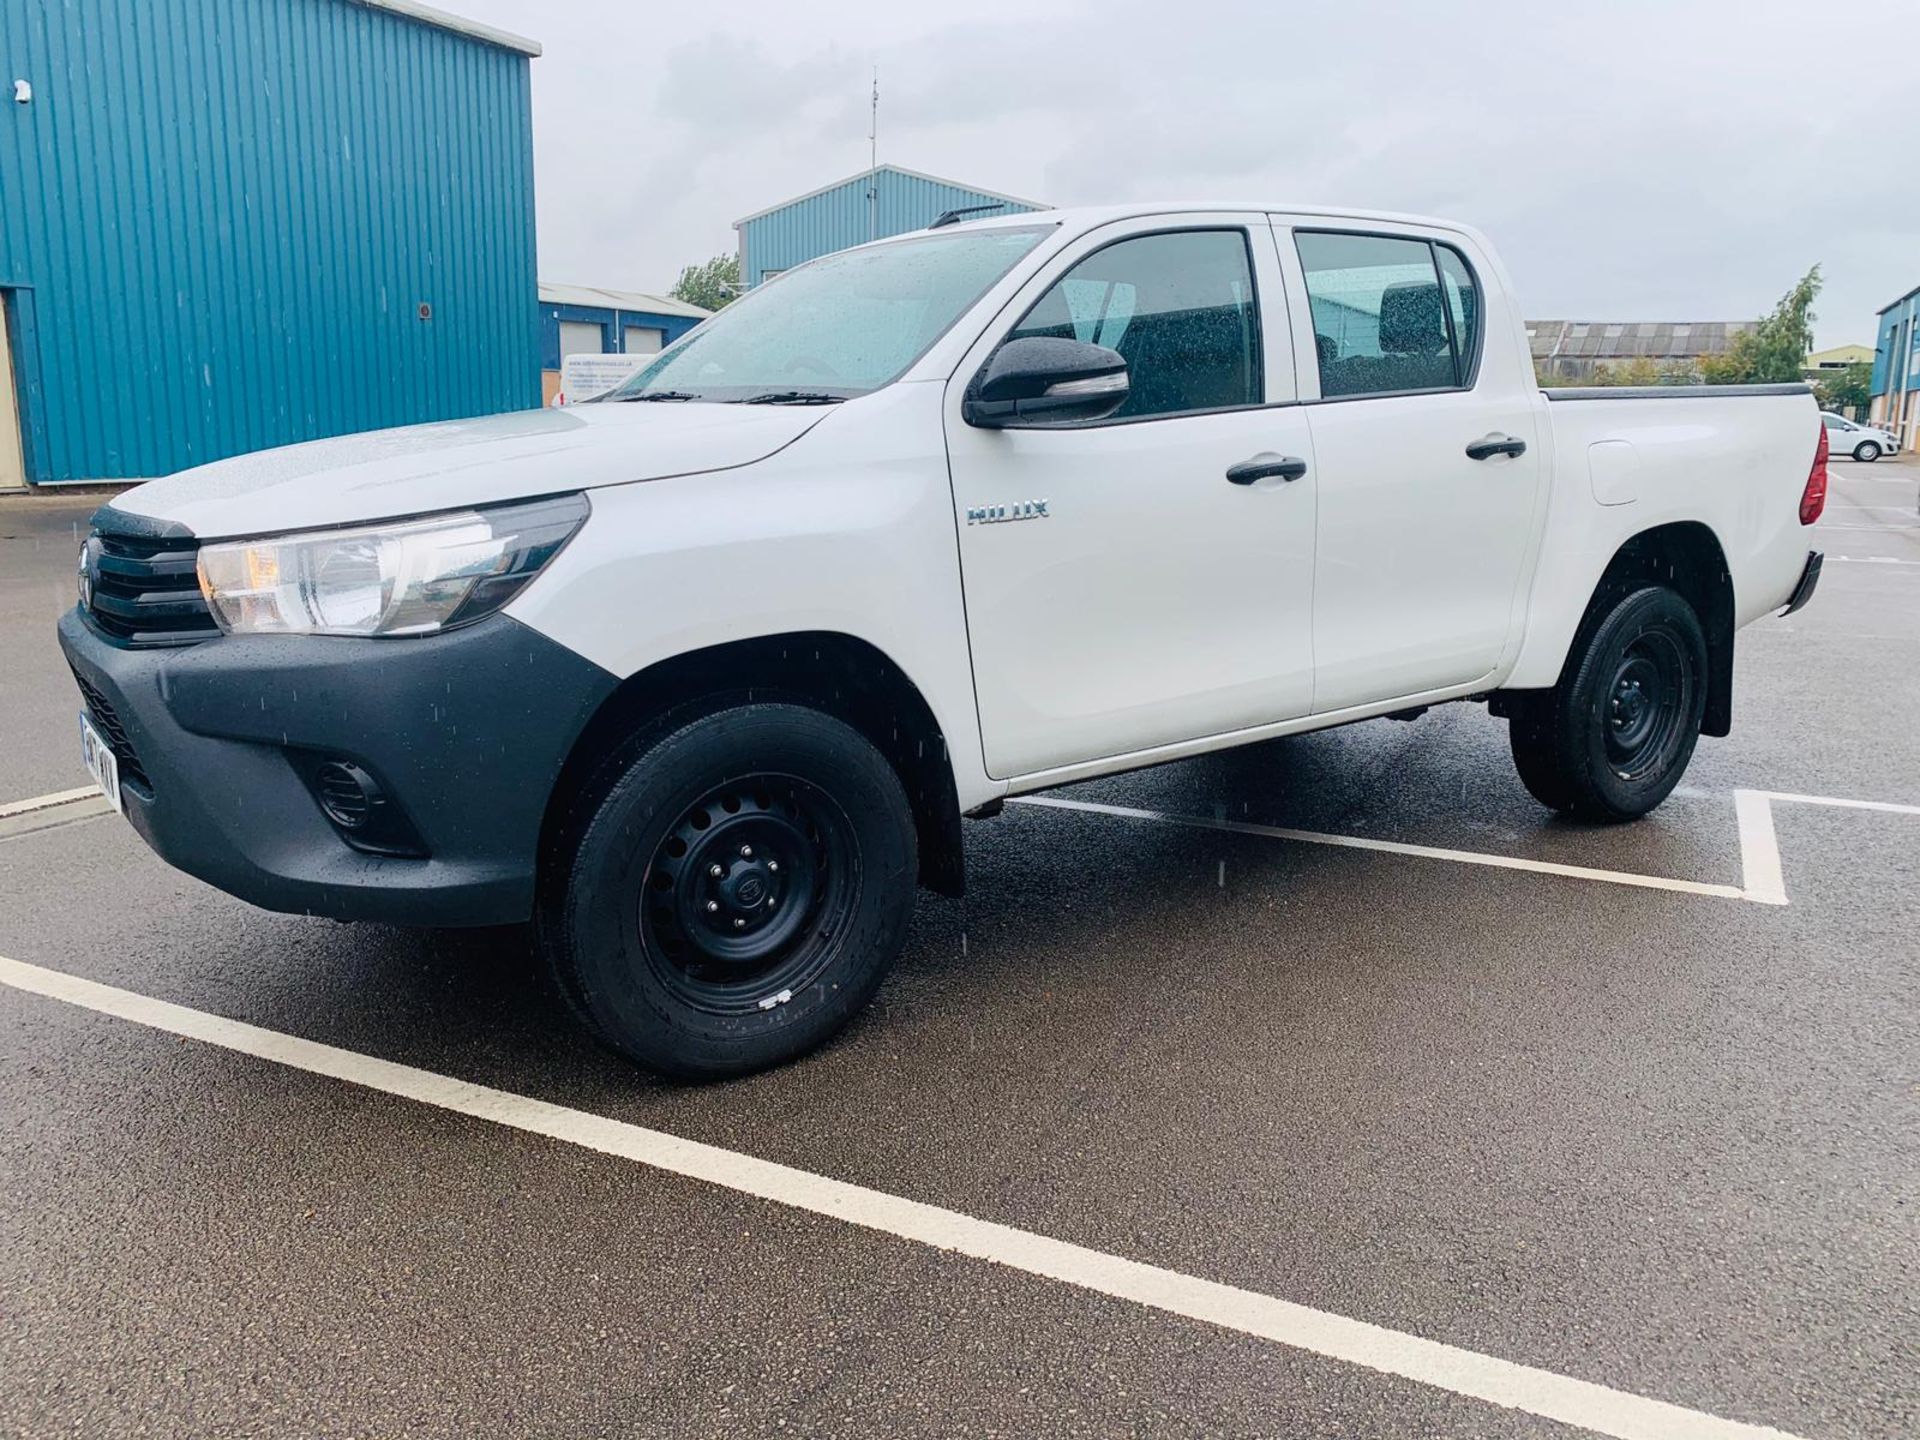 (RESERVE MET) Toyota Hilux 2.4 D-4D Active 4WD Double Cab Pick Up - 2017 17 Reg - Air Con - Euro 6b - Image 7 of 31